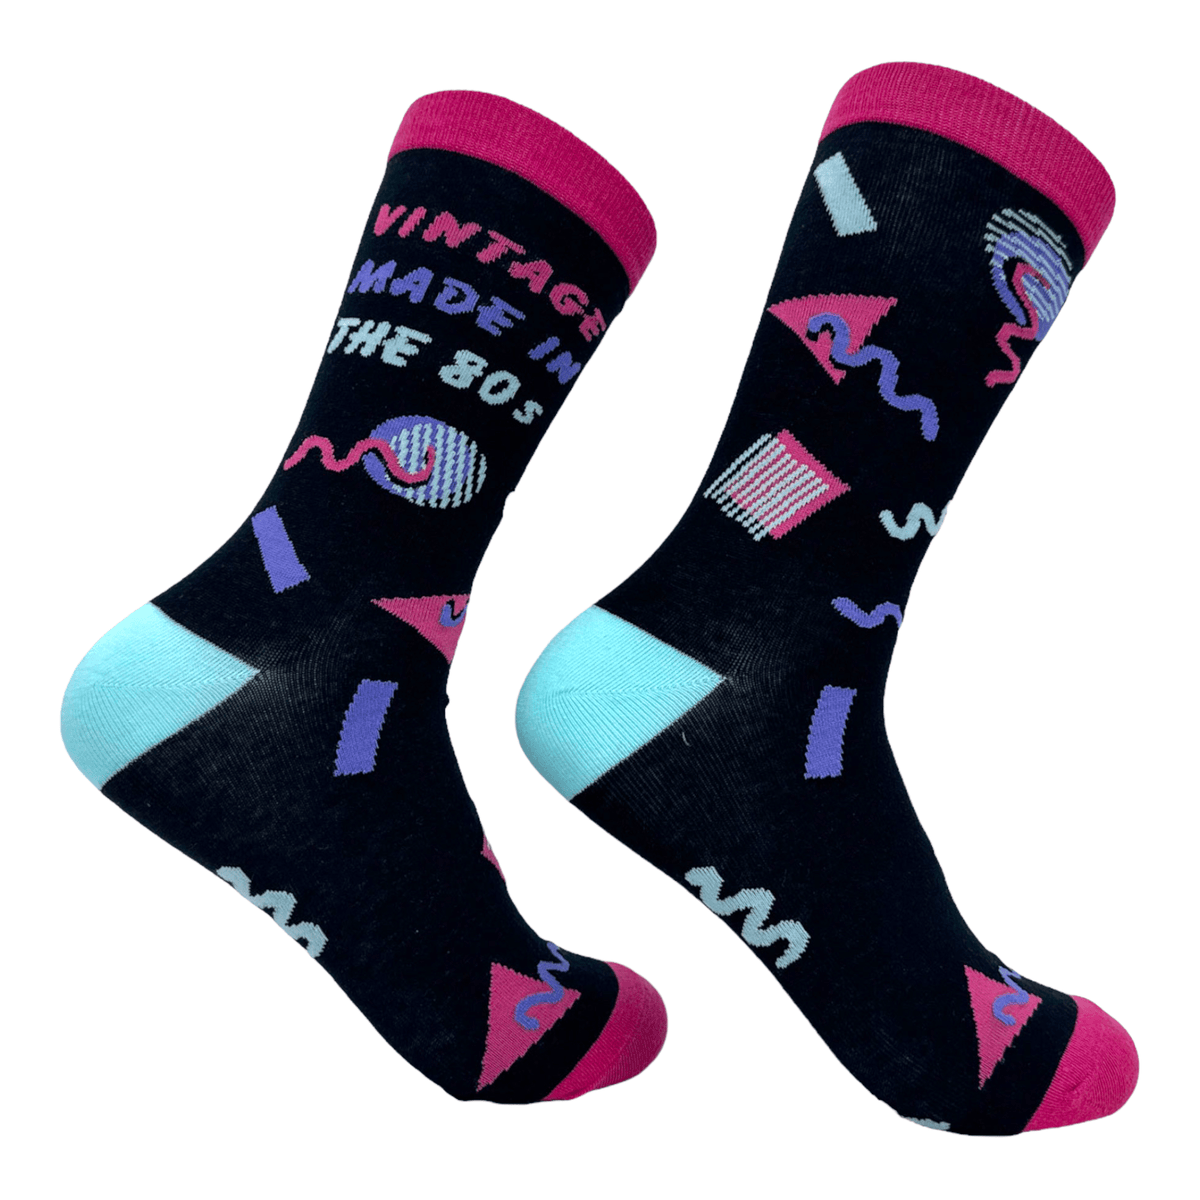 https://www.crazydogtshirts.com/cdn/shop/products/crazy-dog-t-shirts-graphic-socks-women-s-vintage-made-in-the-80s-socks-31013896618099_1200x.png?v=1666218649